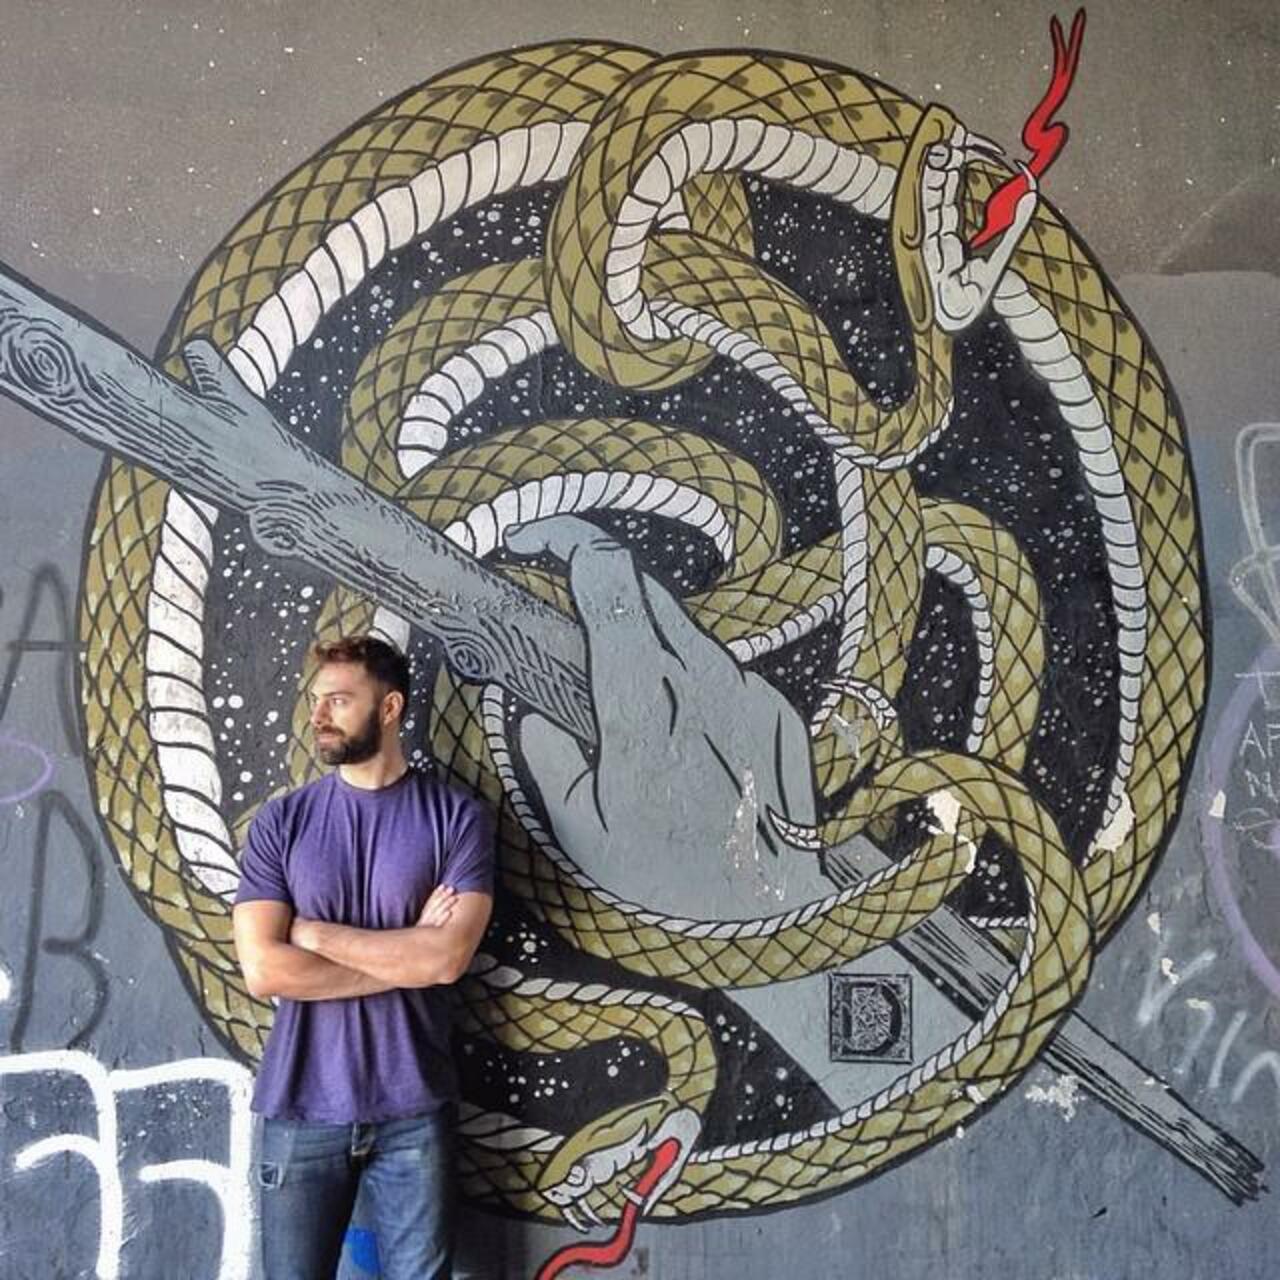 This mural reminded me the Auryn in the movie The Neverending Story.
#Crazydiamondtts #mural #streetart #urbanart #… http://t.co/LFeTlGzskI